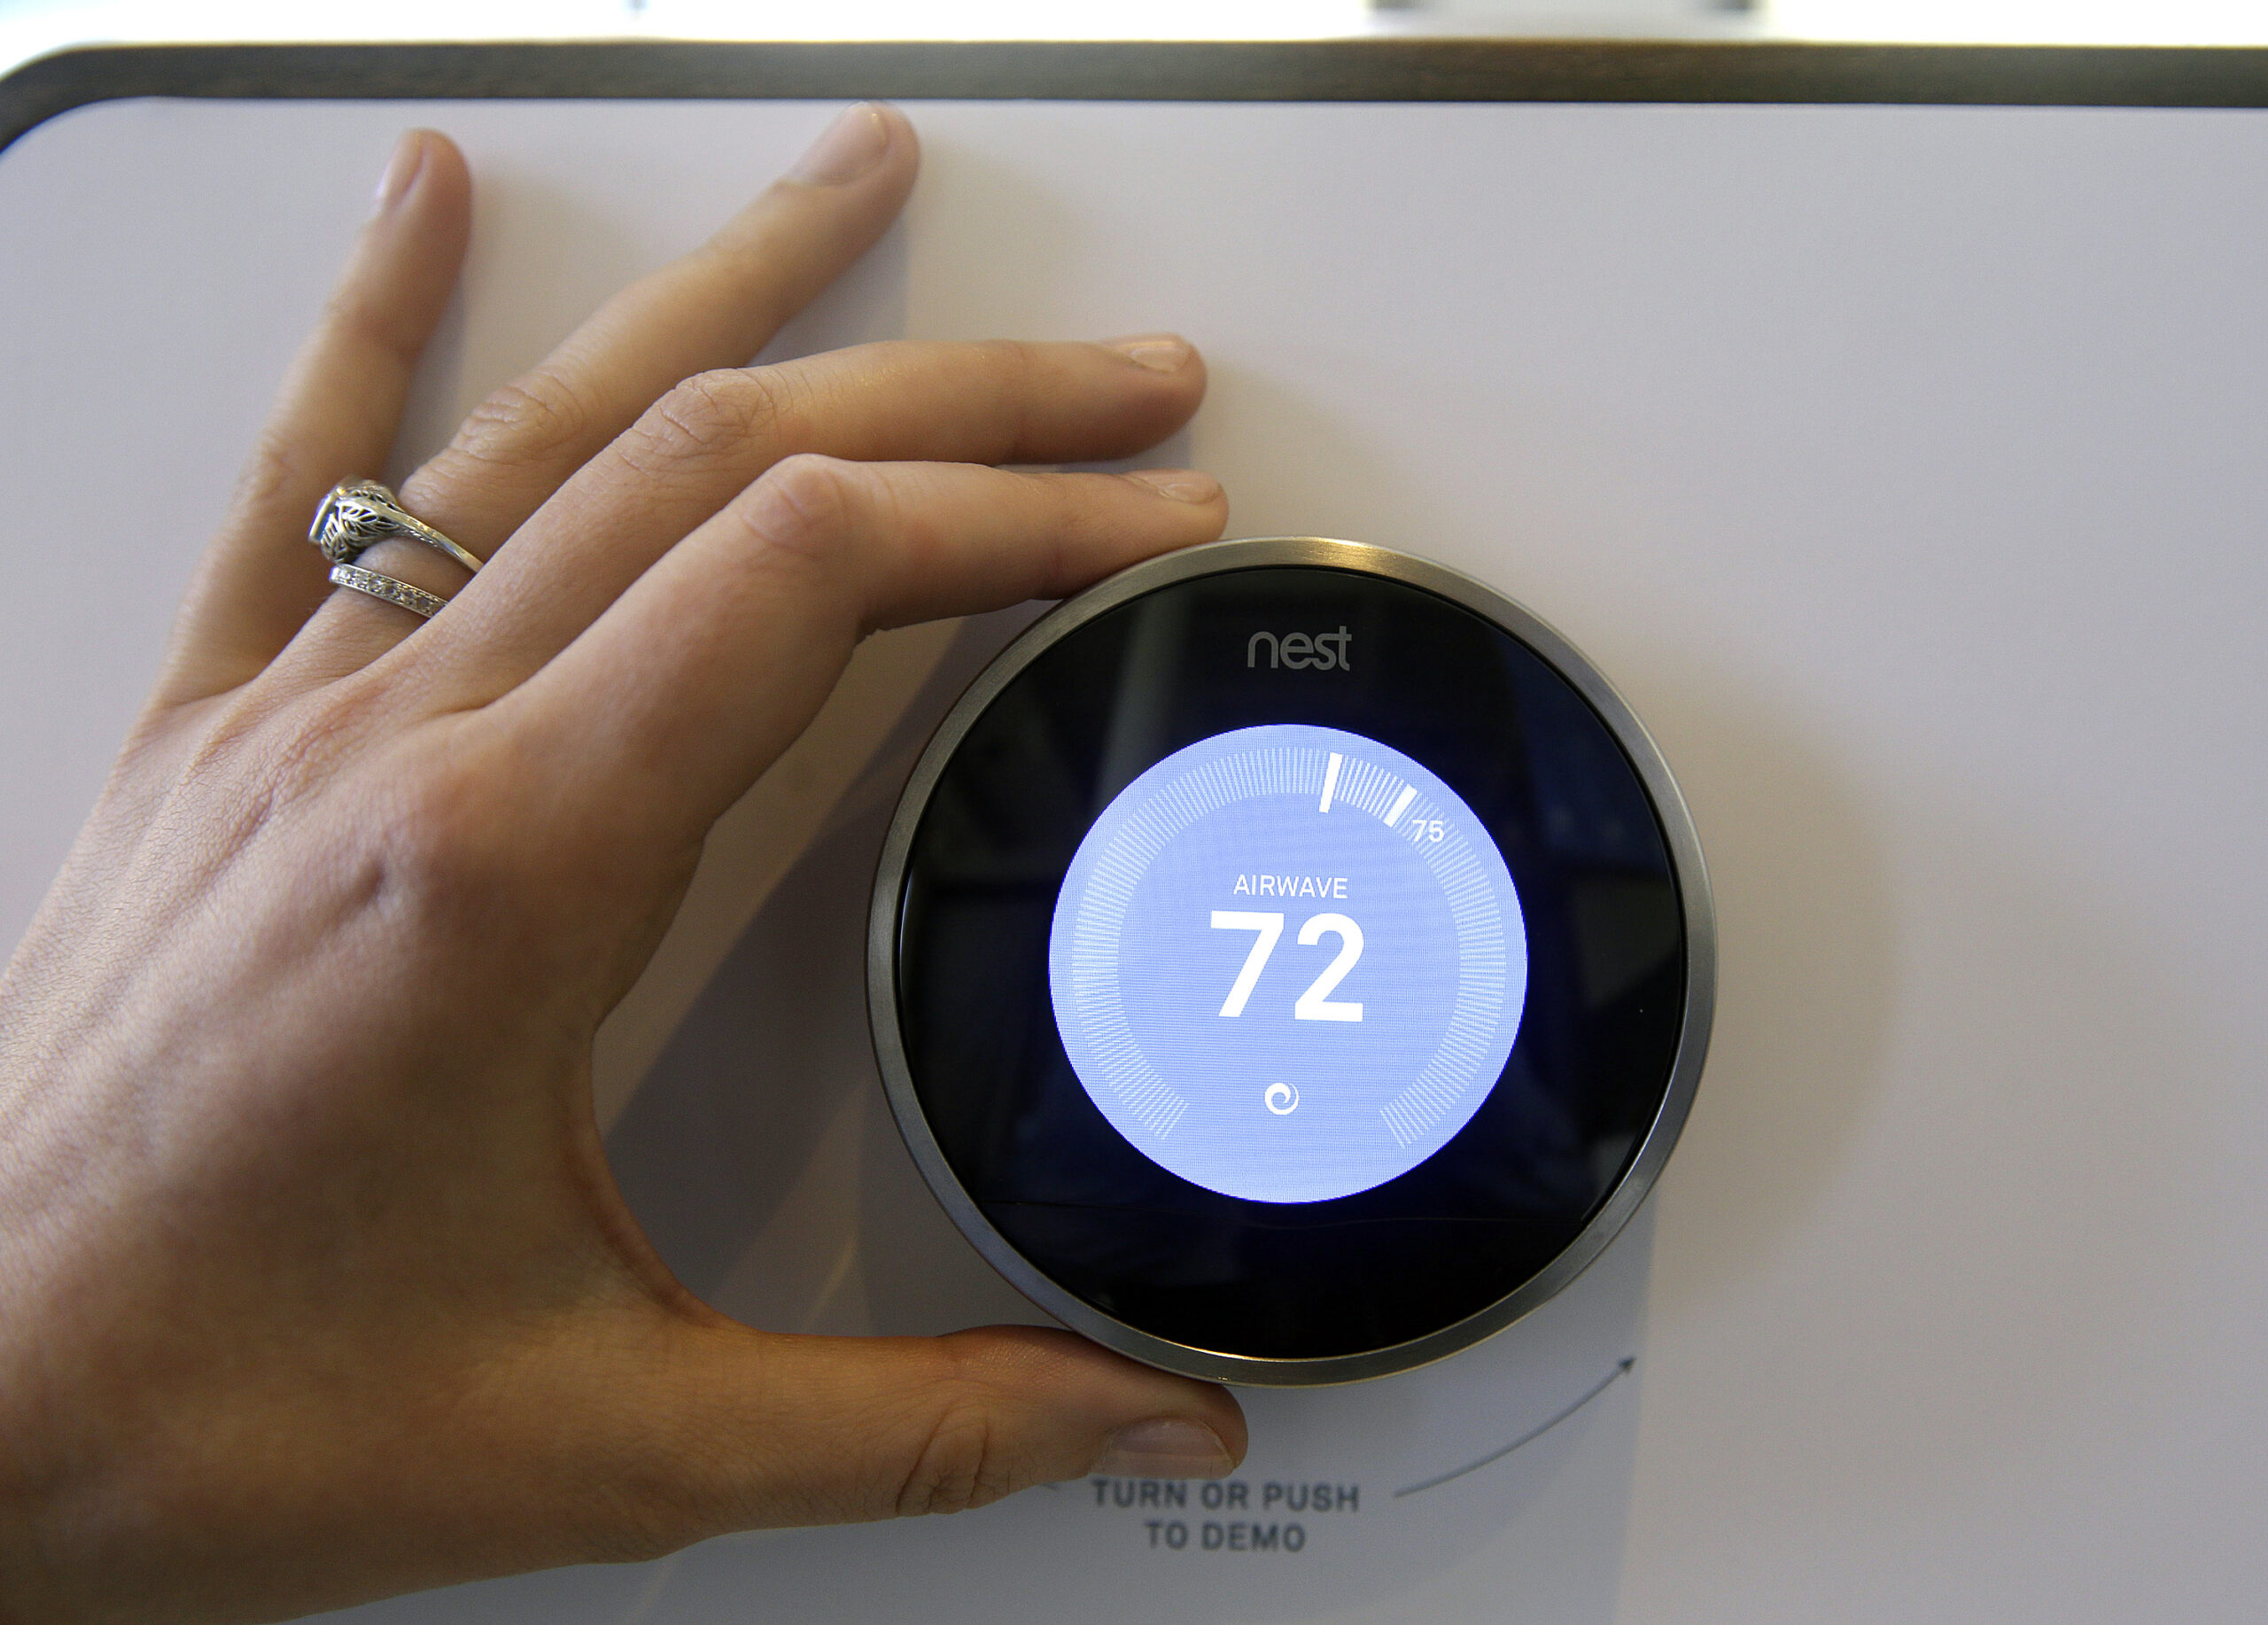 Would You Let Your Utility Dial Down Your Thermostat During Peak Energy Use?